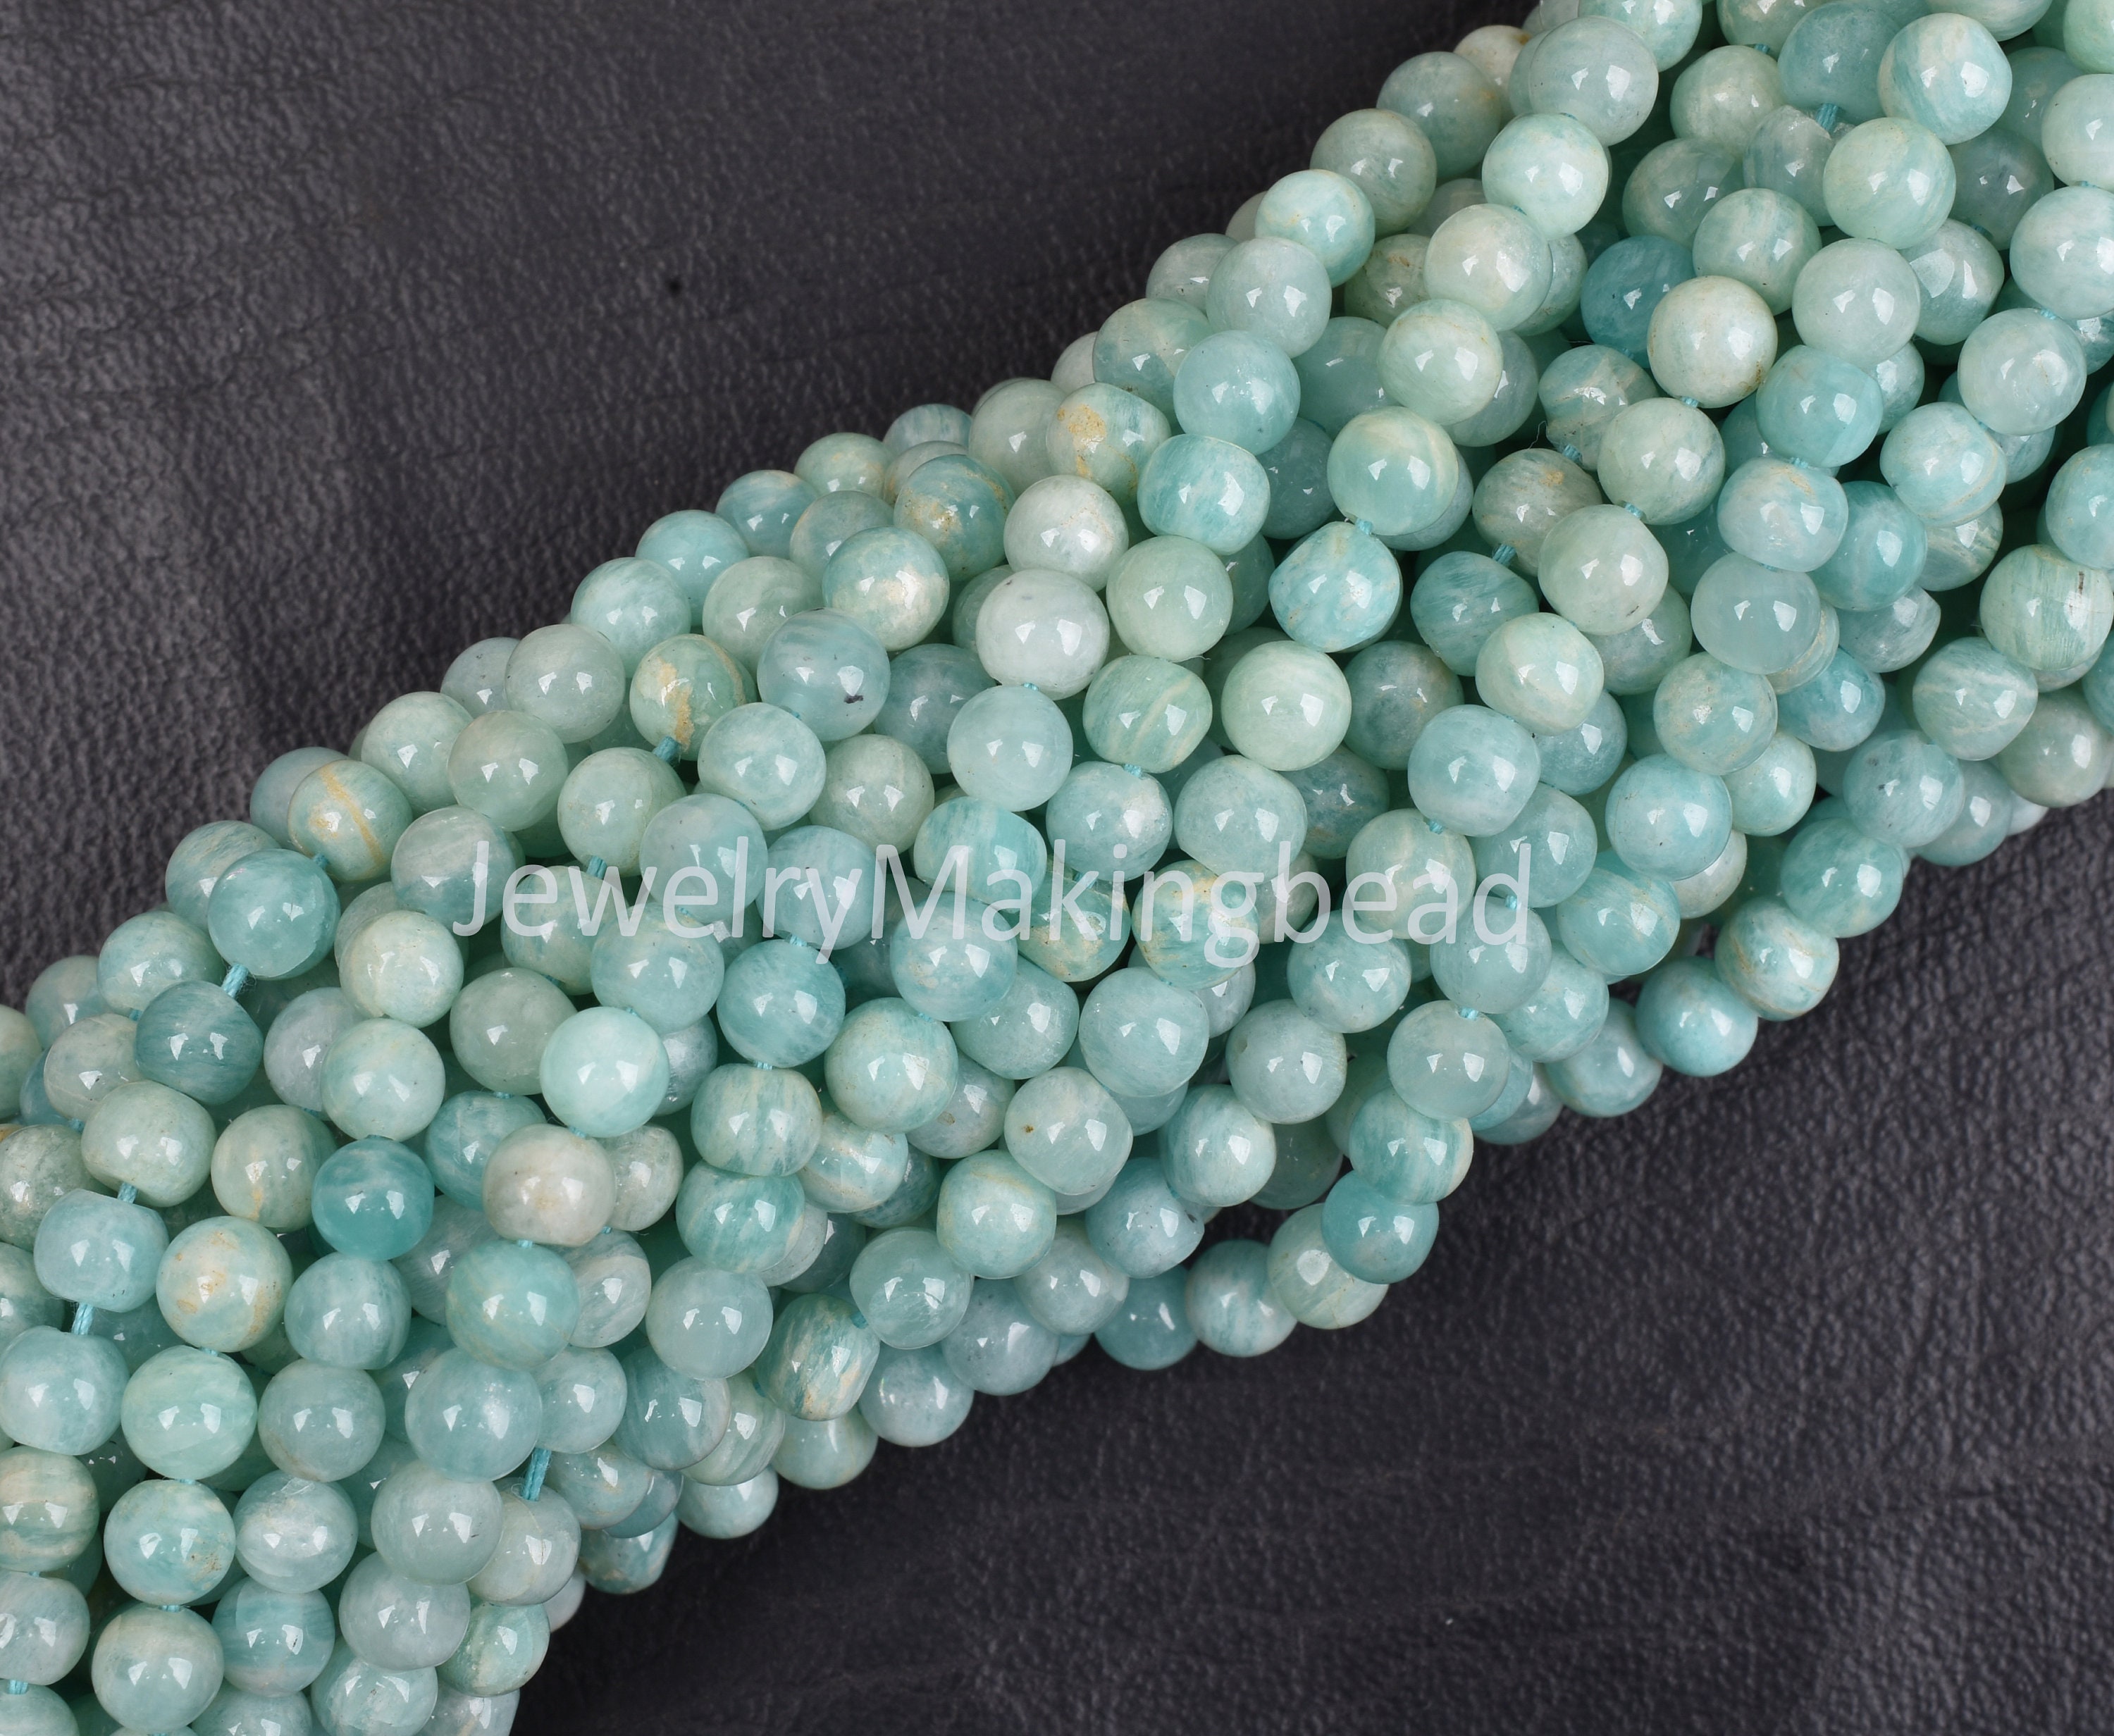 14 Inches Natural Amazonite Round Shape Beads Strand NE-82E127 Details about   190.00 Cts 